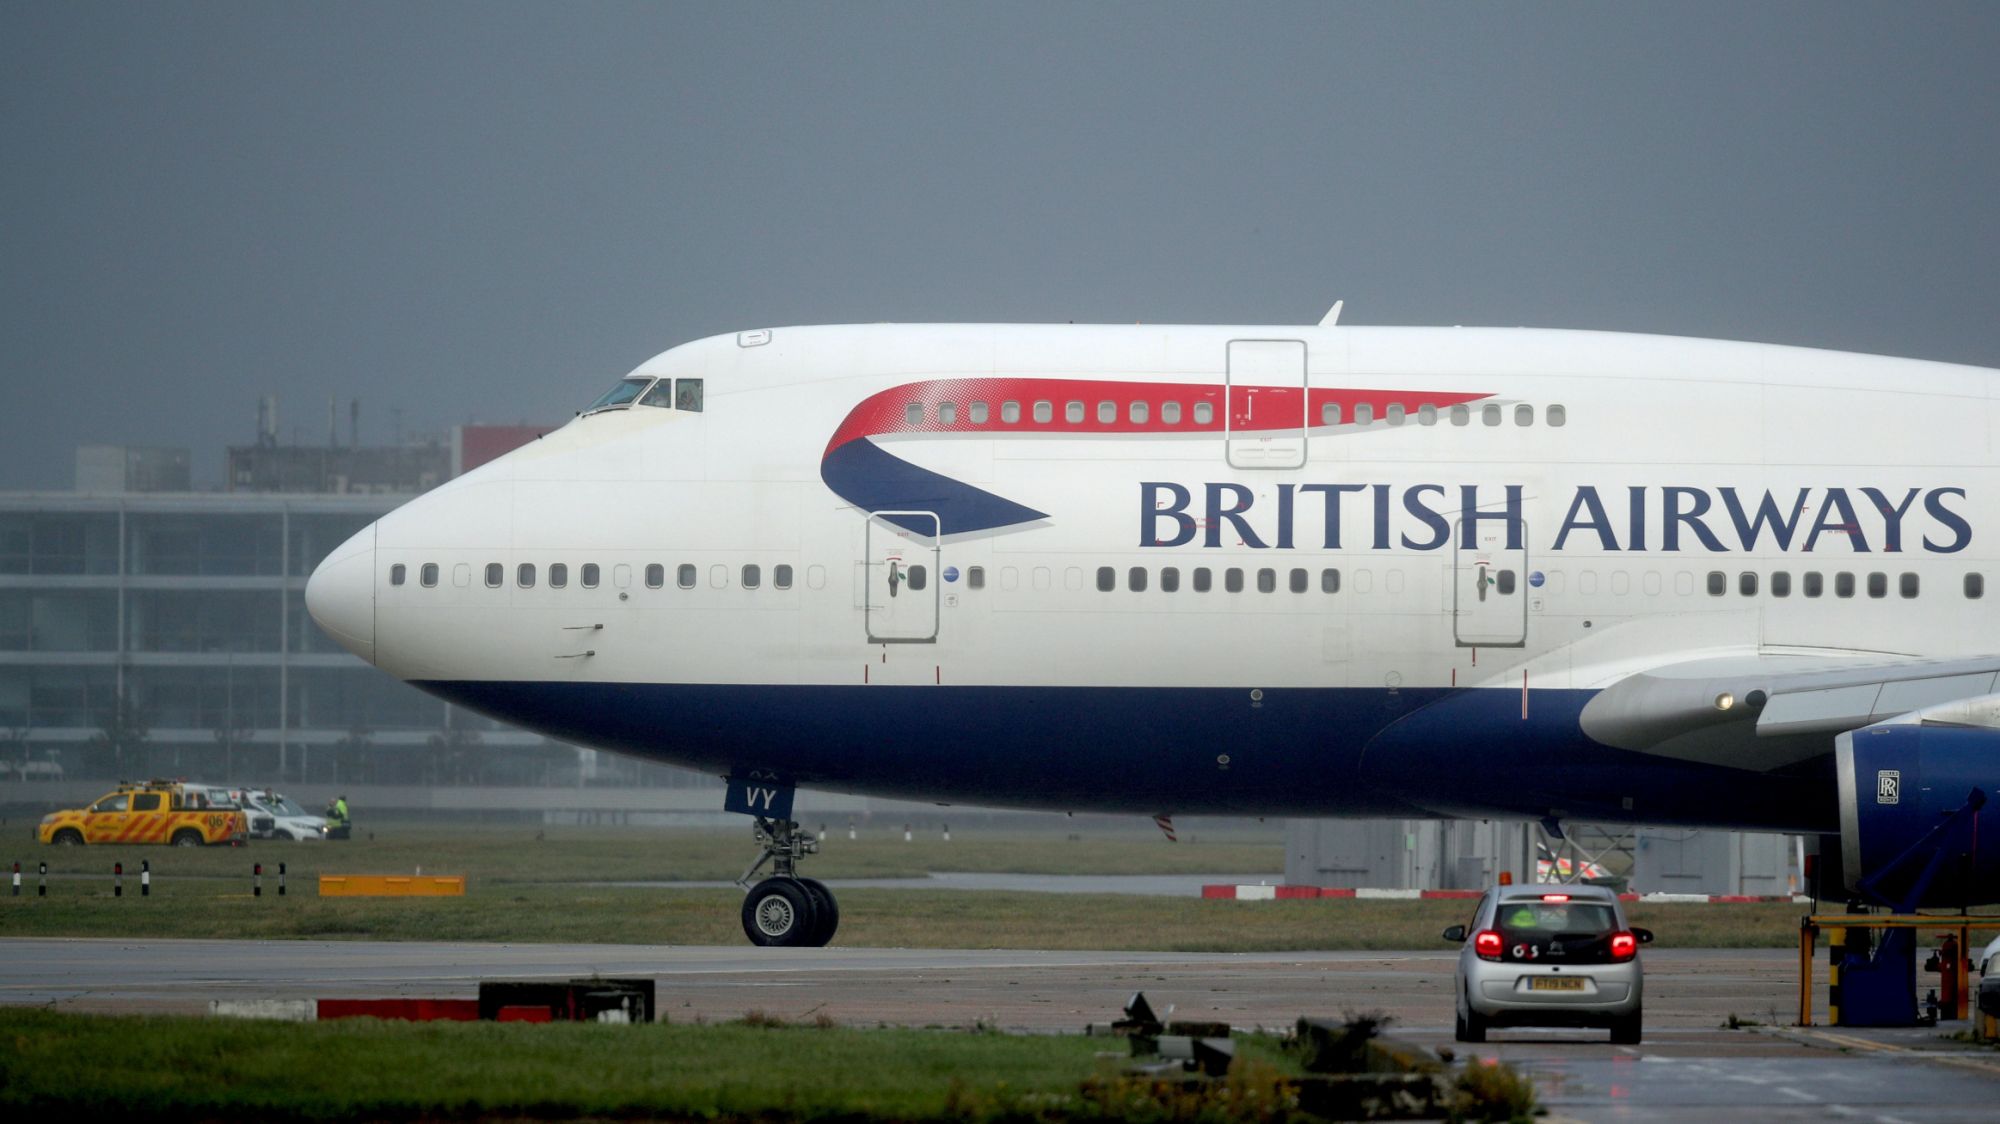 British Airways to trial Covid-19 tests on passengers